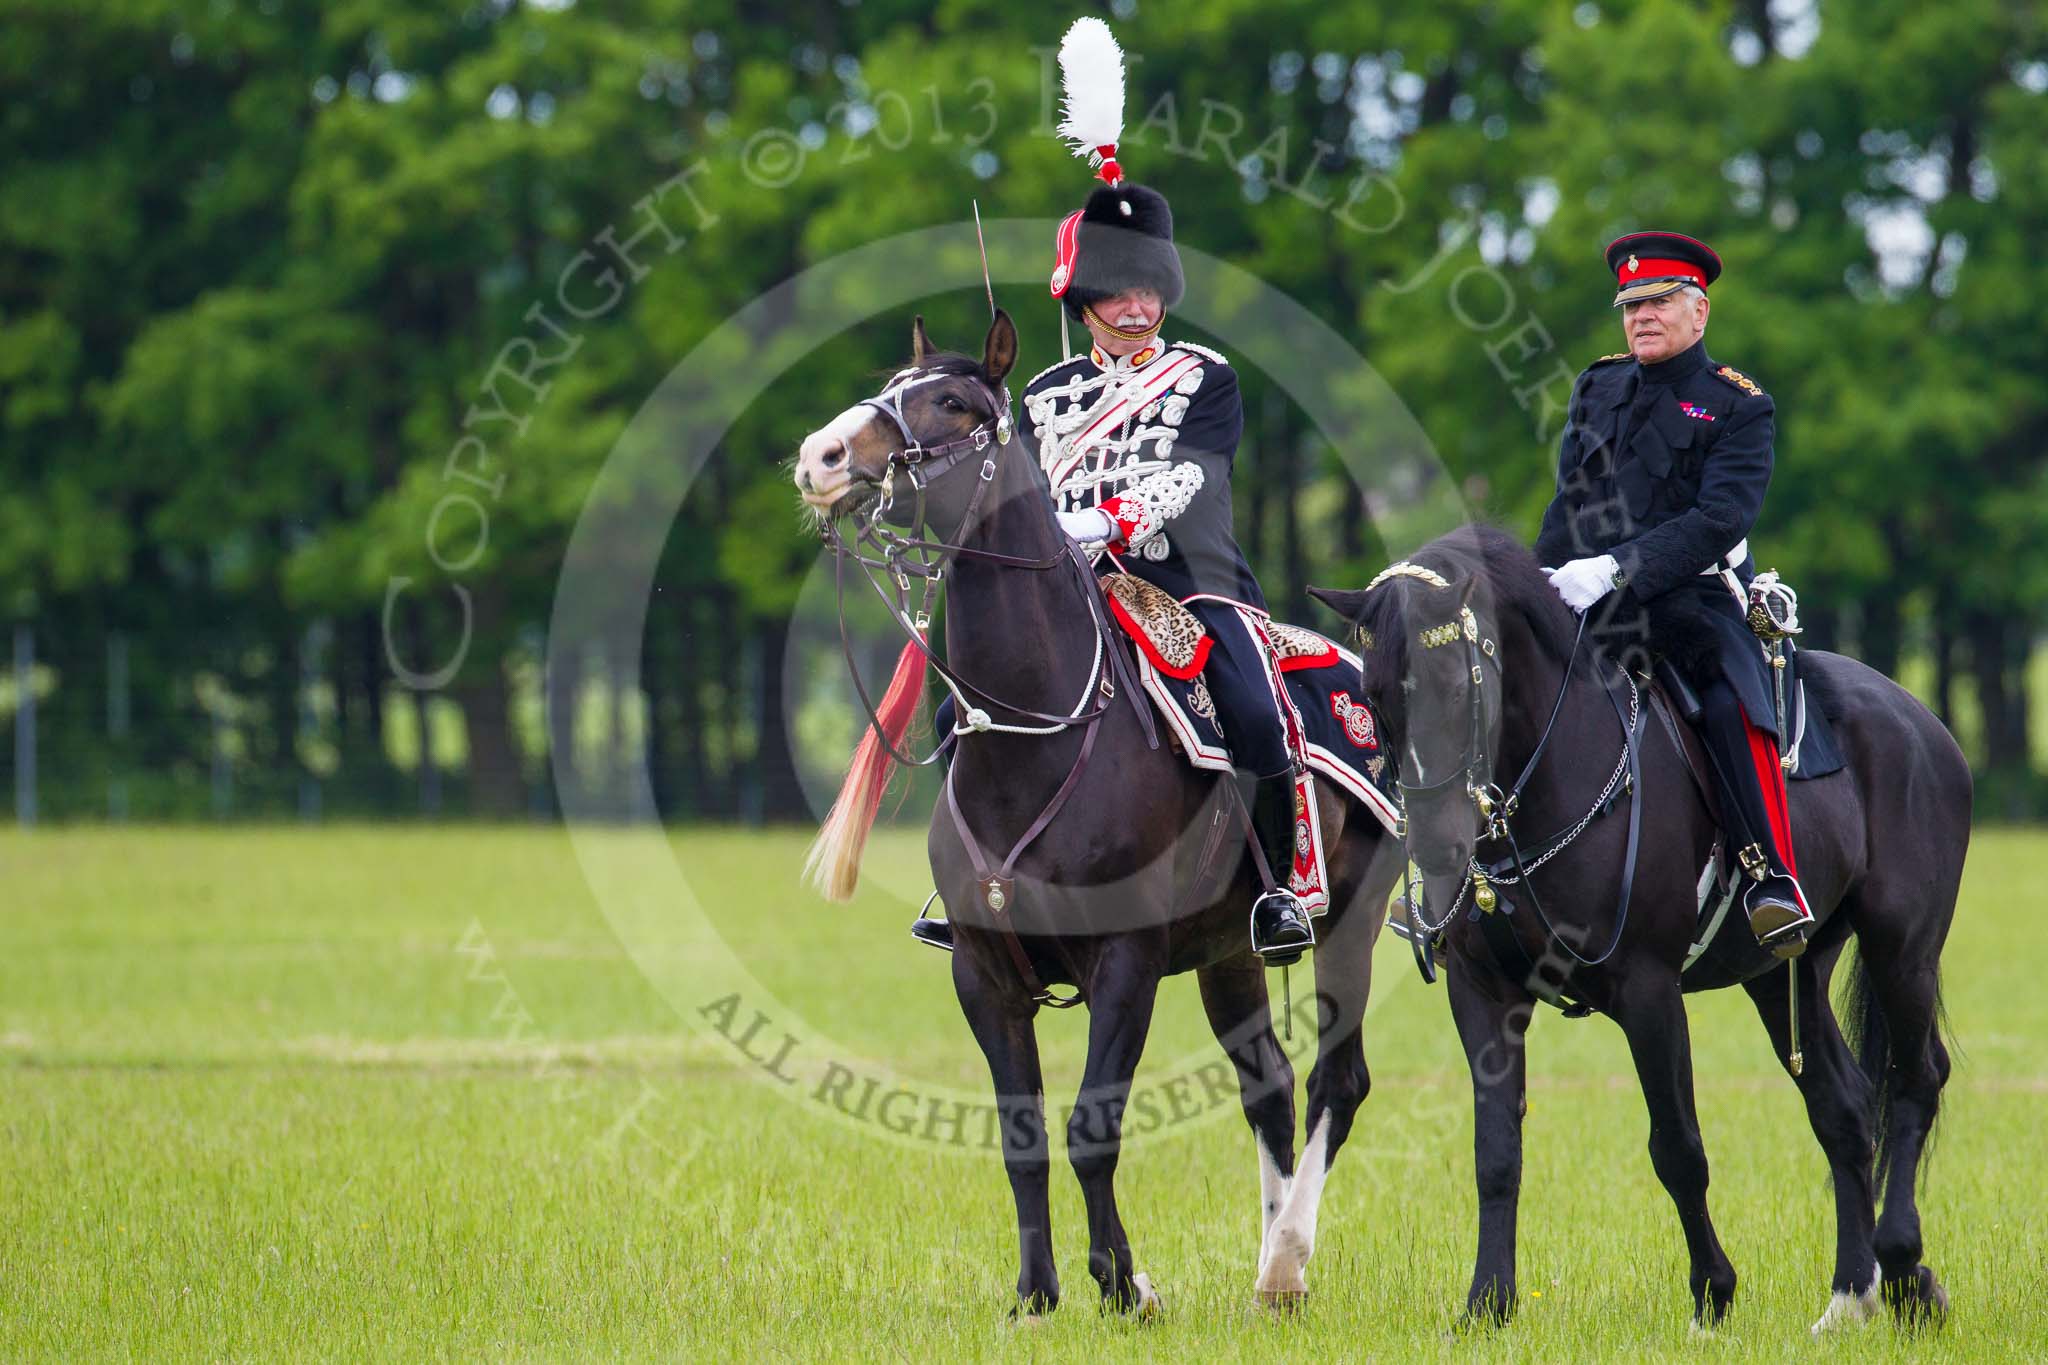 The Light Cavalry HAC Annual Review and Inspection 2013.
Windsor Great Park Review Ground,
Windsor,
Berkshire,
United Kingdom,
on 09 June 2013 at 13:27, image #364